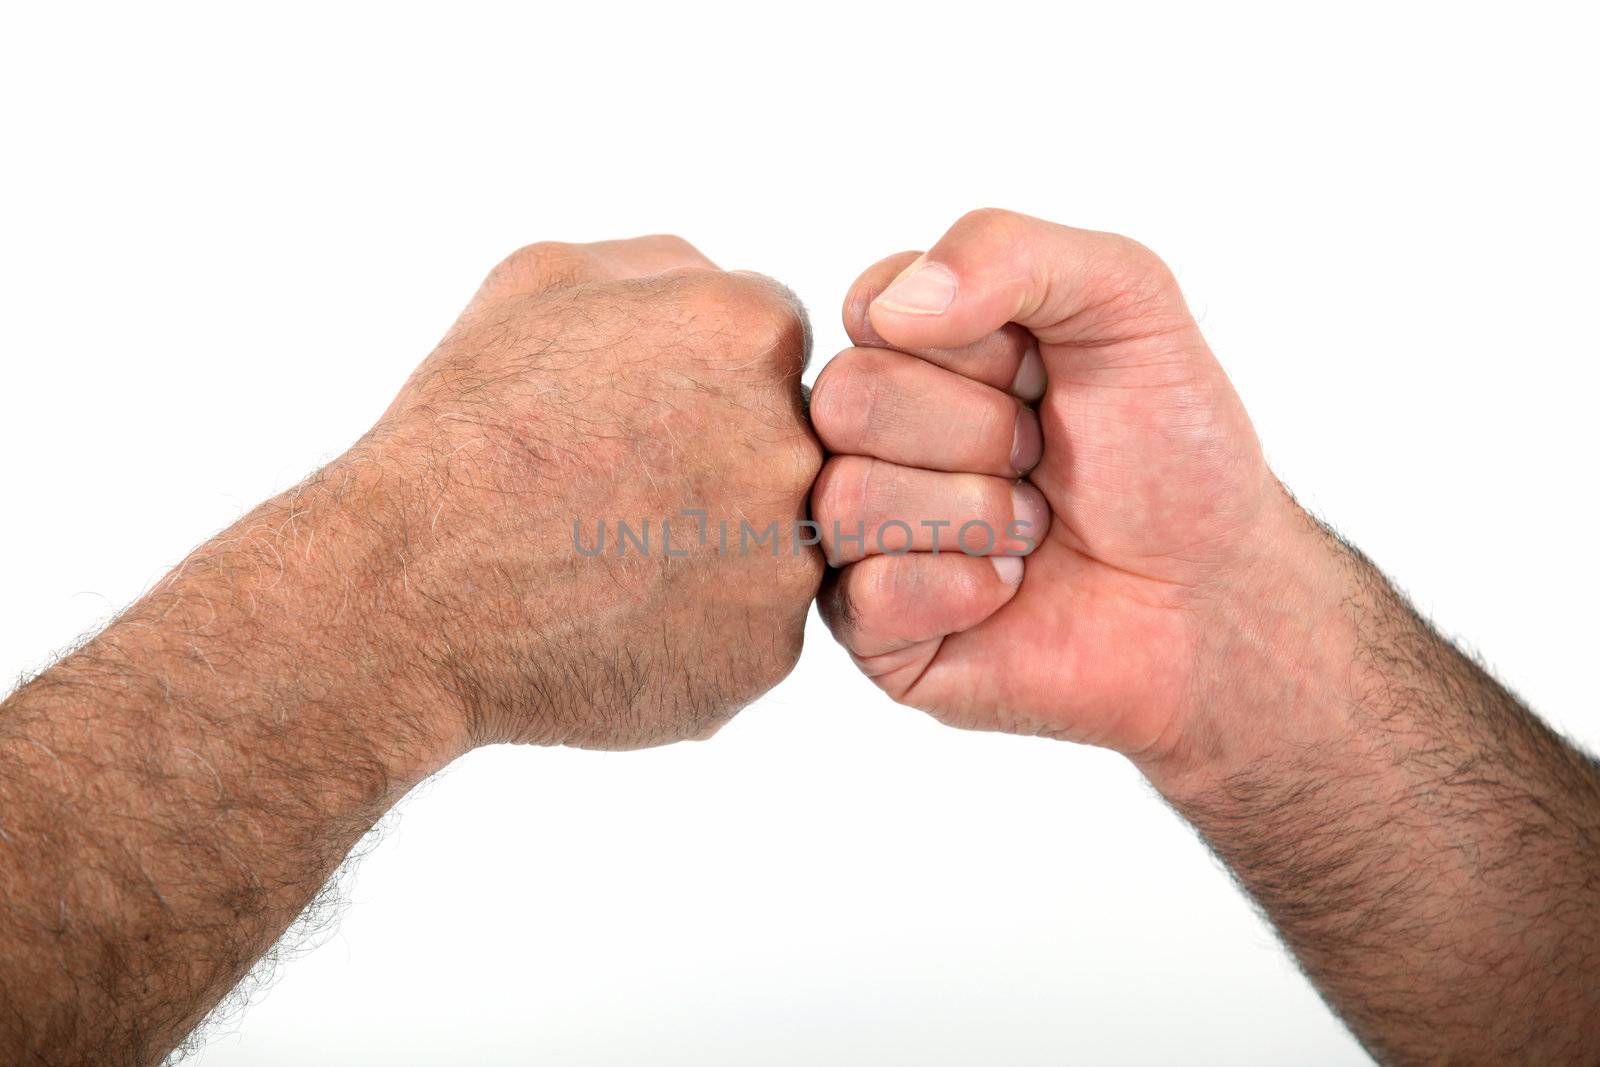 Two men bumping fists by phovoir